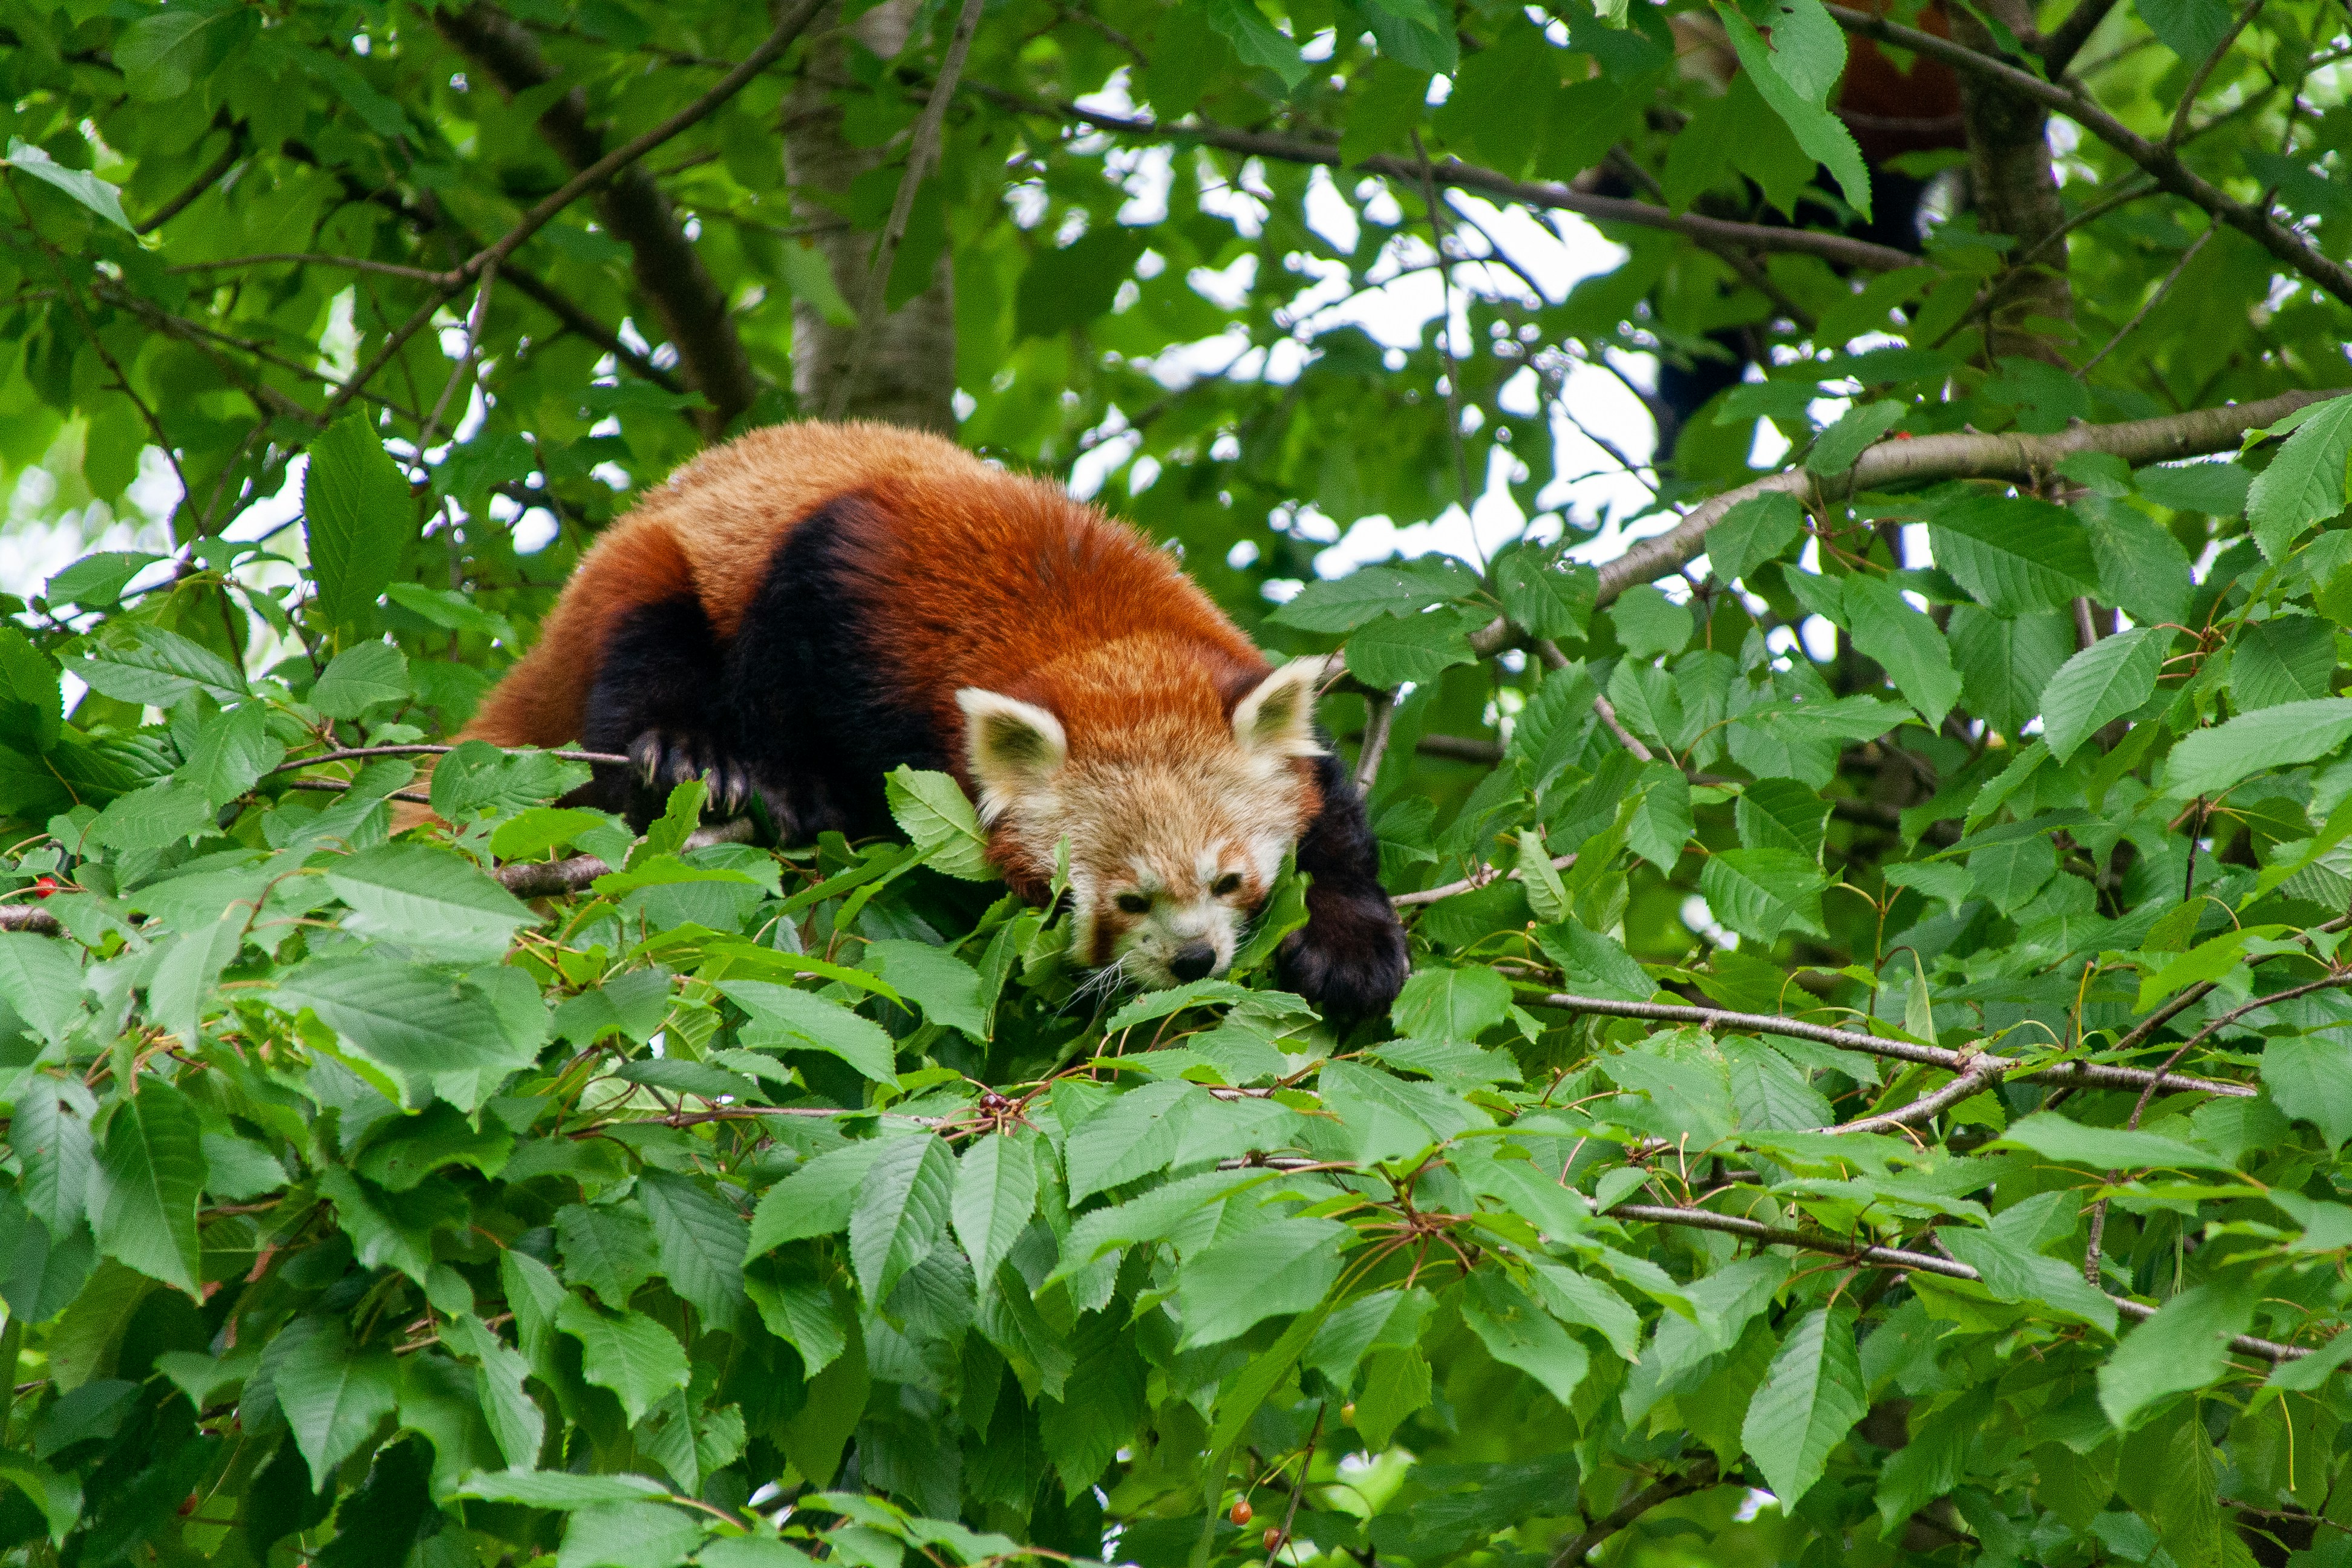 A cute small / lesser panda or red panda at the Zoo. The panda is climbing carefully at the top of the tree.